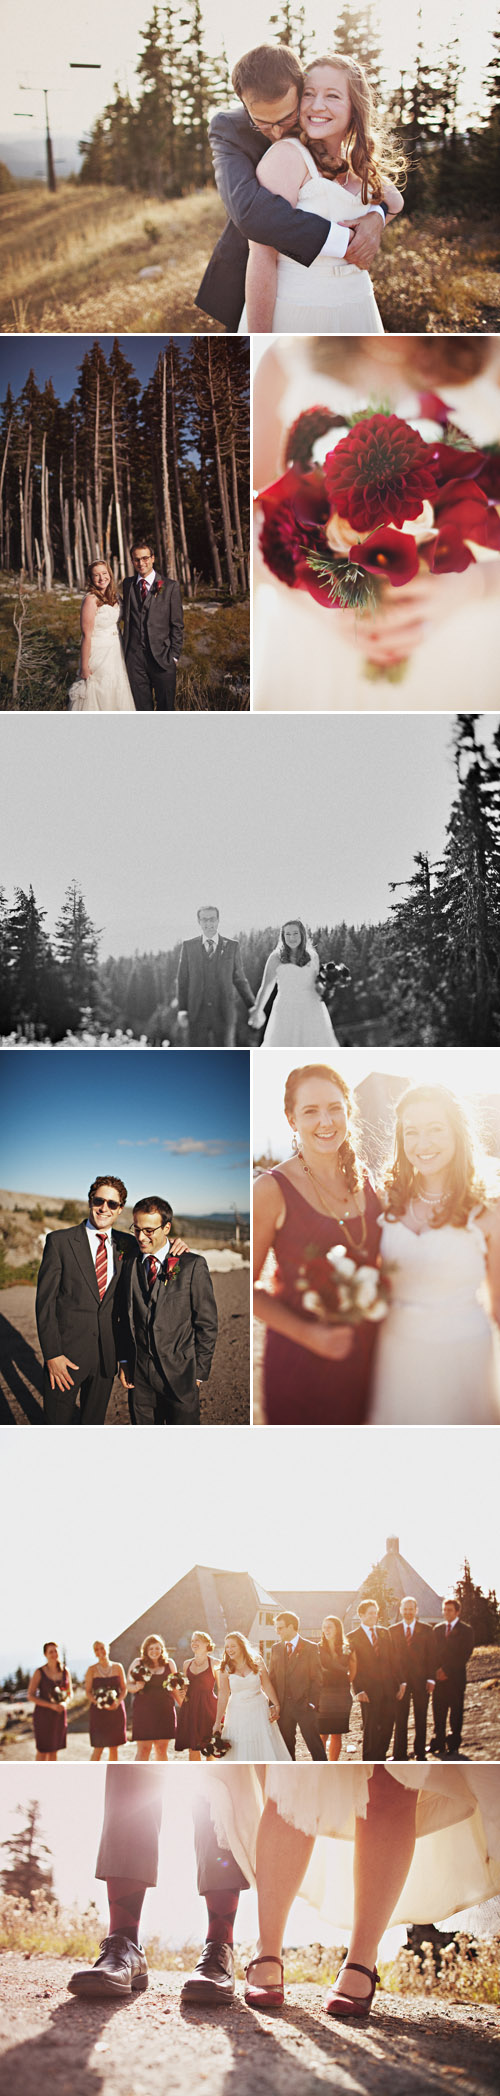 mt. hood, oregon real wedding, images by sean flanigan photography